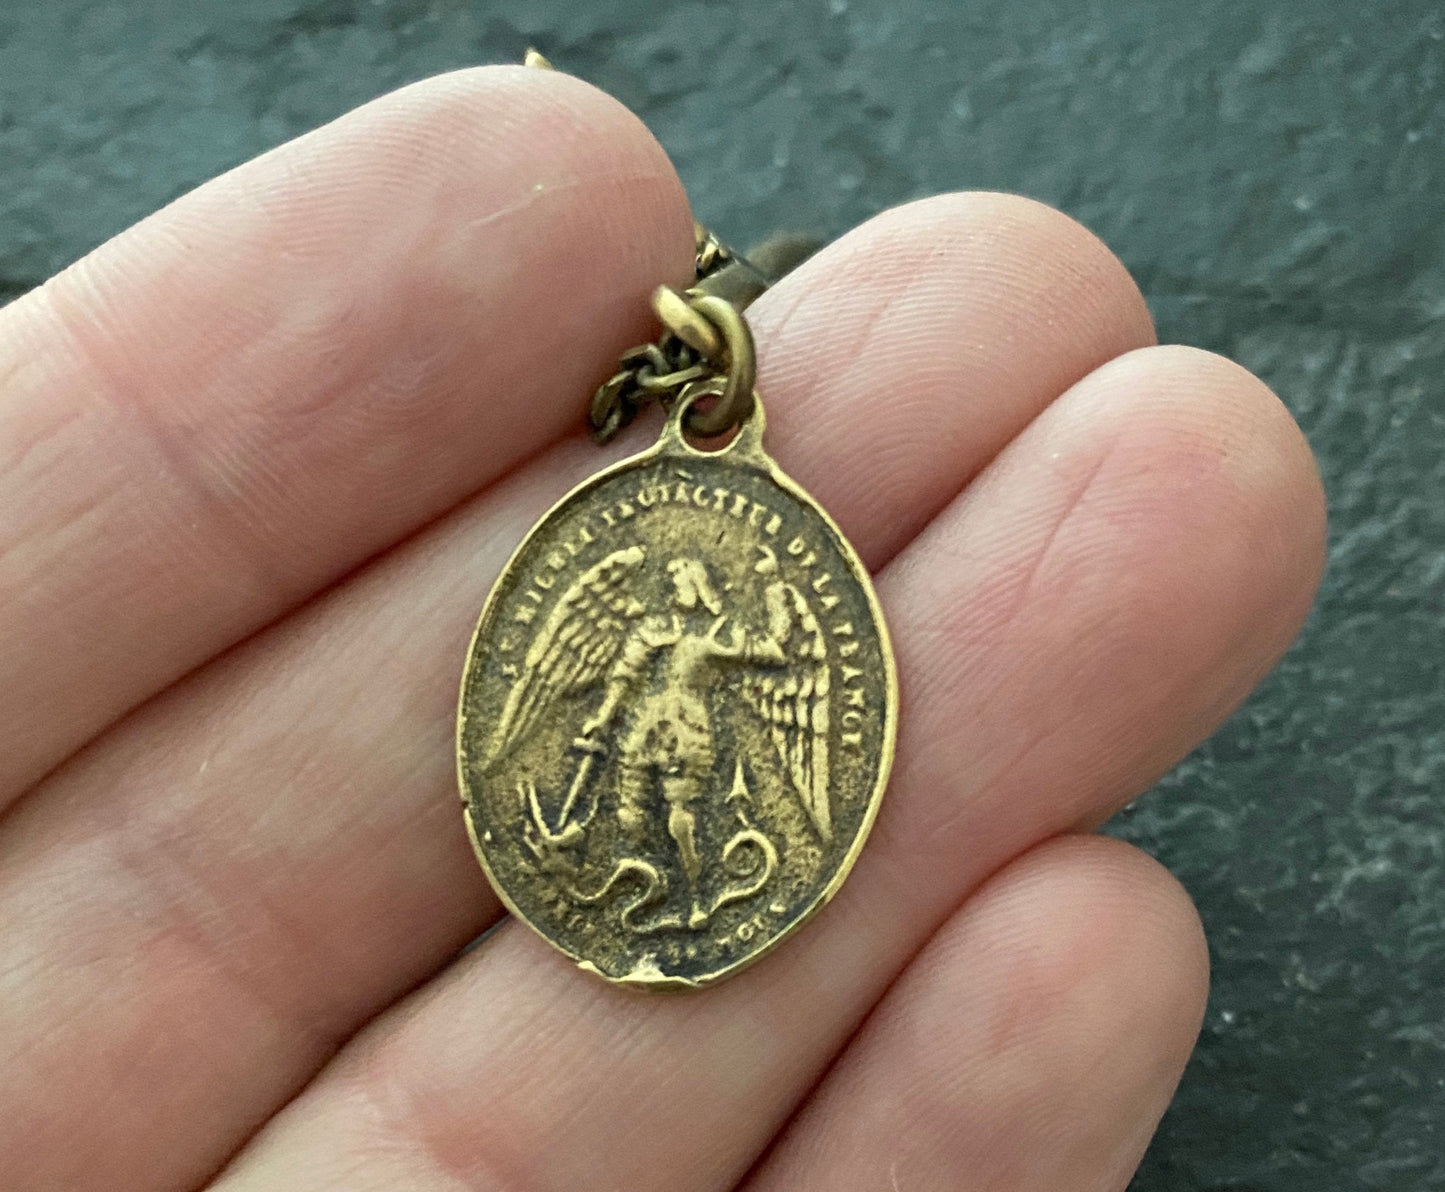 Men's Antiqued Brass Dual Pendant Necklace with Rope Tied Cross and Archangel St. Michael Medal, Unisex Necklace, BR-036, Johnny Ltd